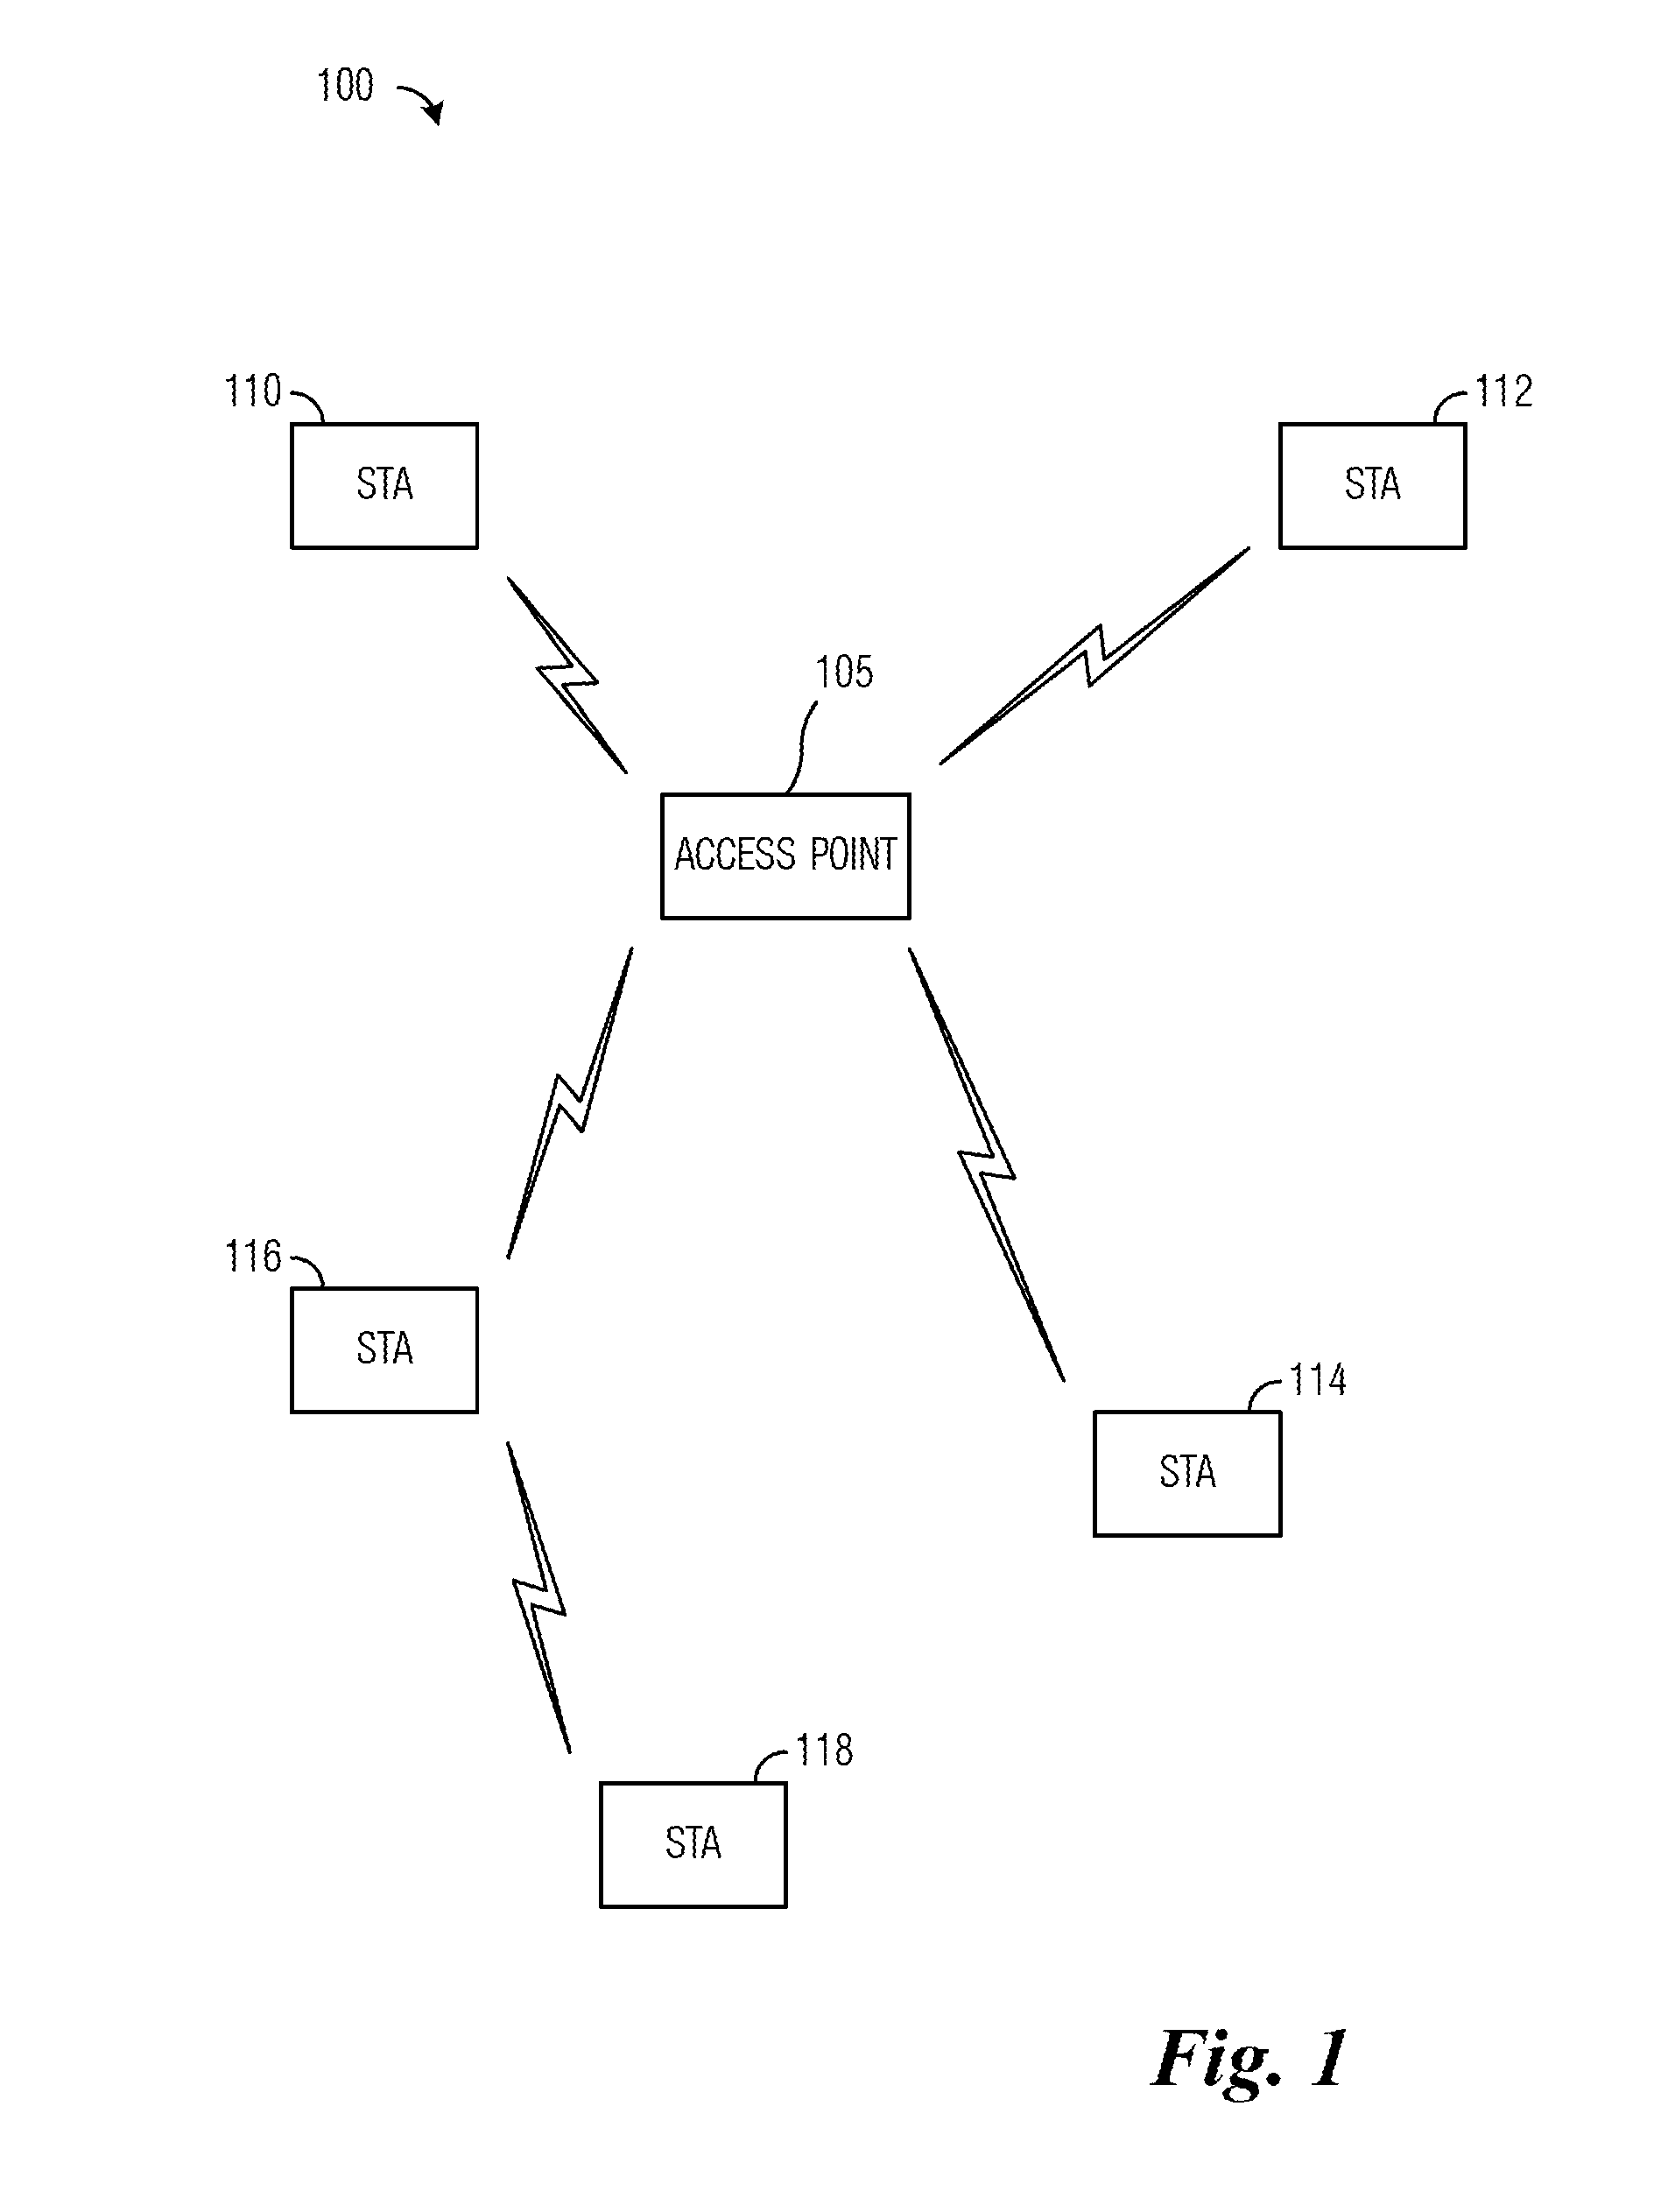 System and Method for Digital Communications with Interference Avoidance